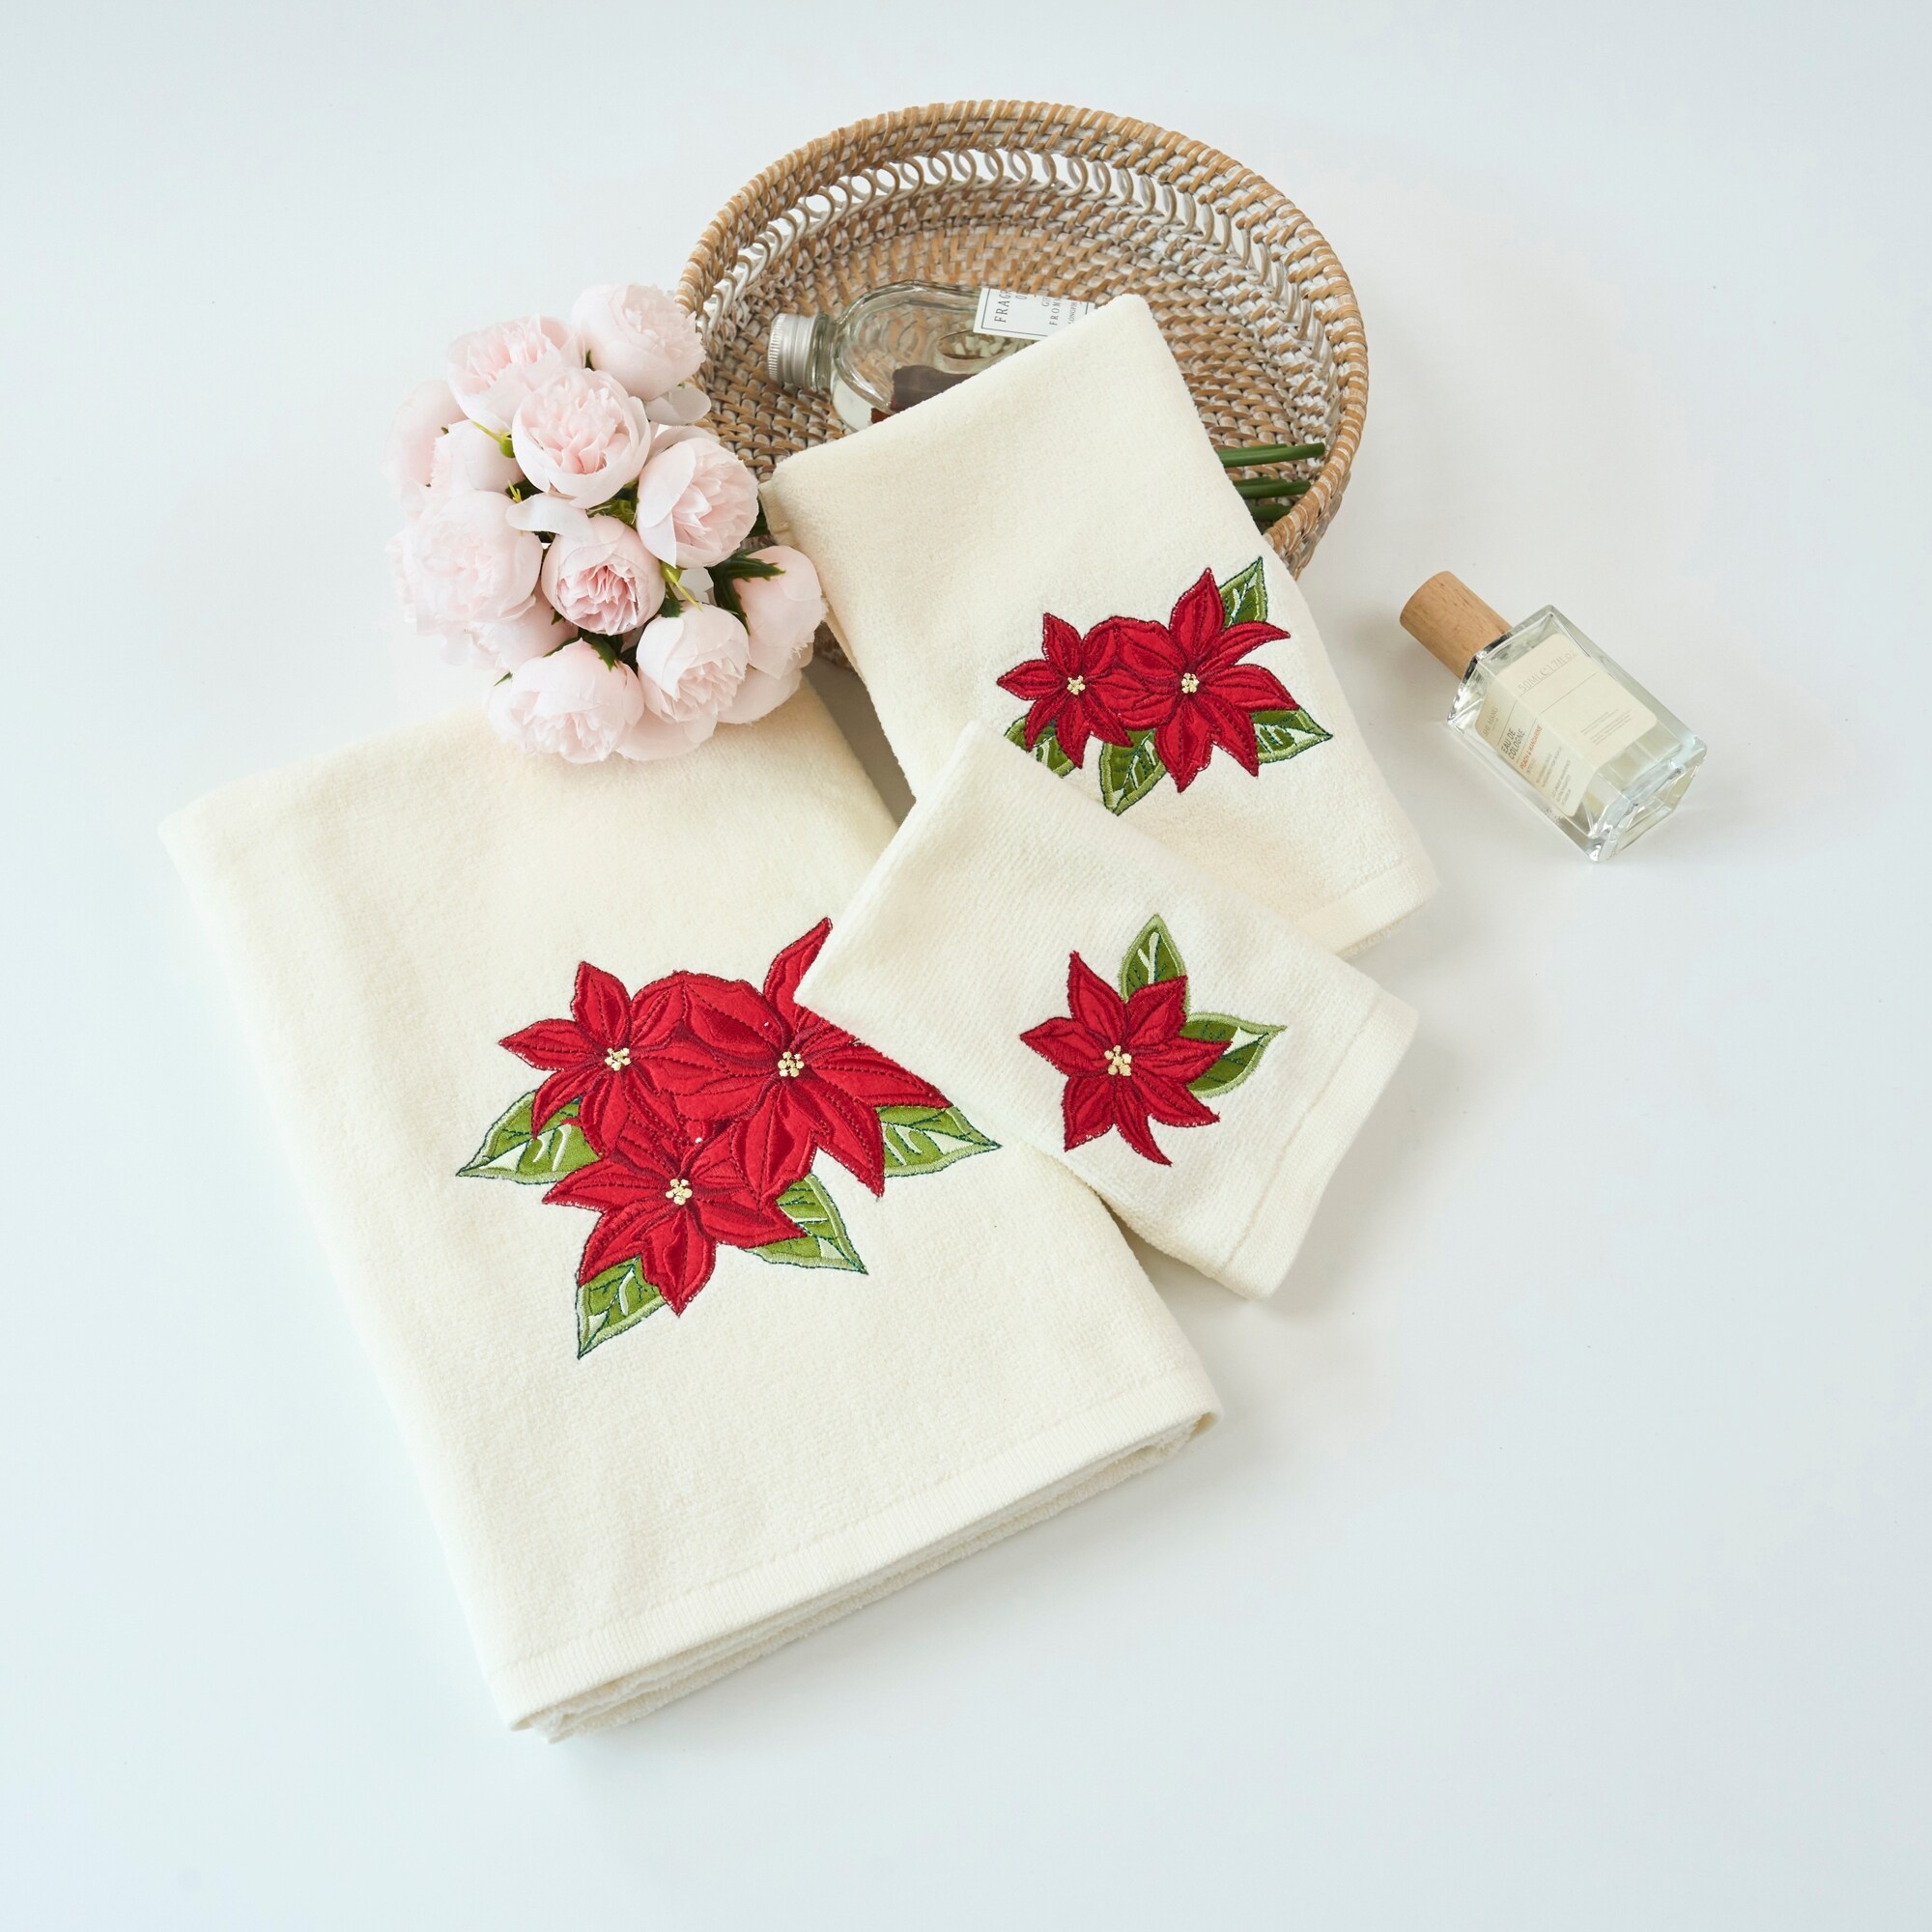 https://ak1.ostkcdn.com/images/products/is/images/direct/cbd928d728e8f79bb68a89038a14b43e9dc23fe1/Xmas-Premium-Decor-Soft-100%25-Cotton-Embroidered-Bathroom-Modern-3-Piece-Christmas-Towel-Set%2C-Red-Poinsettia-Flower-with-Ivory.jpg